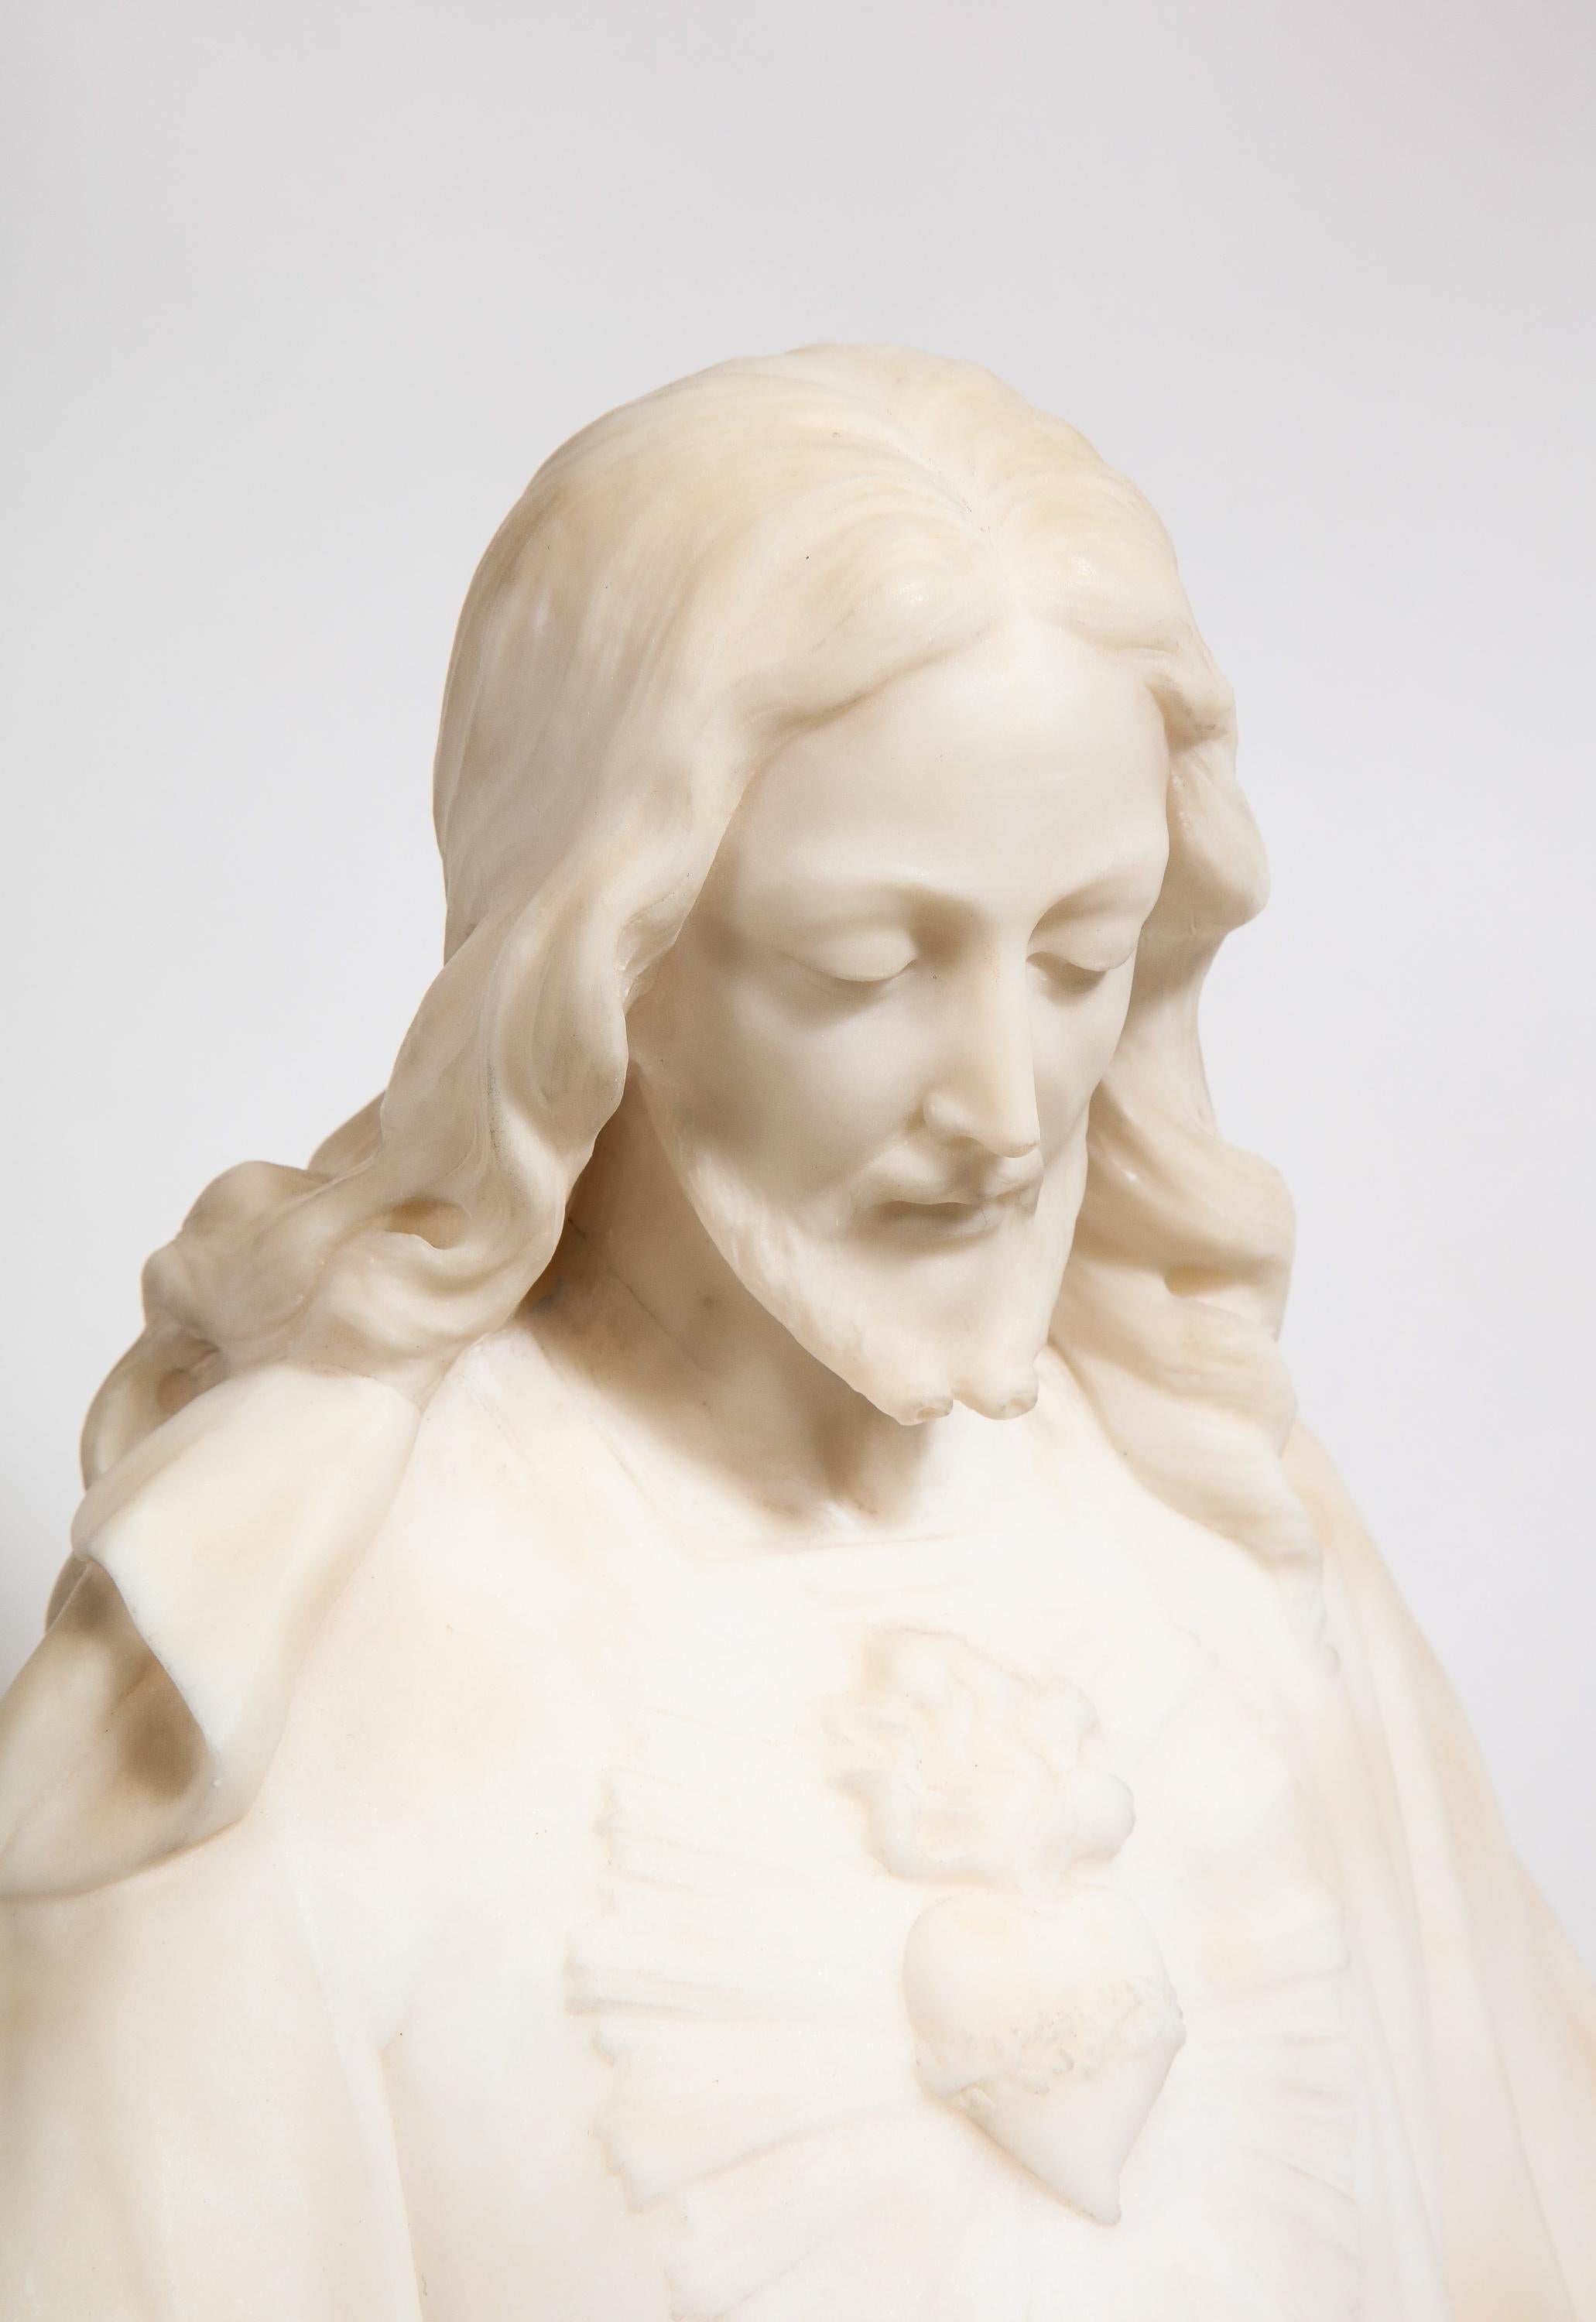 Museum Quality Italian Marble Sculpture of Holy Jesus Christ, 19th Century 3